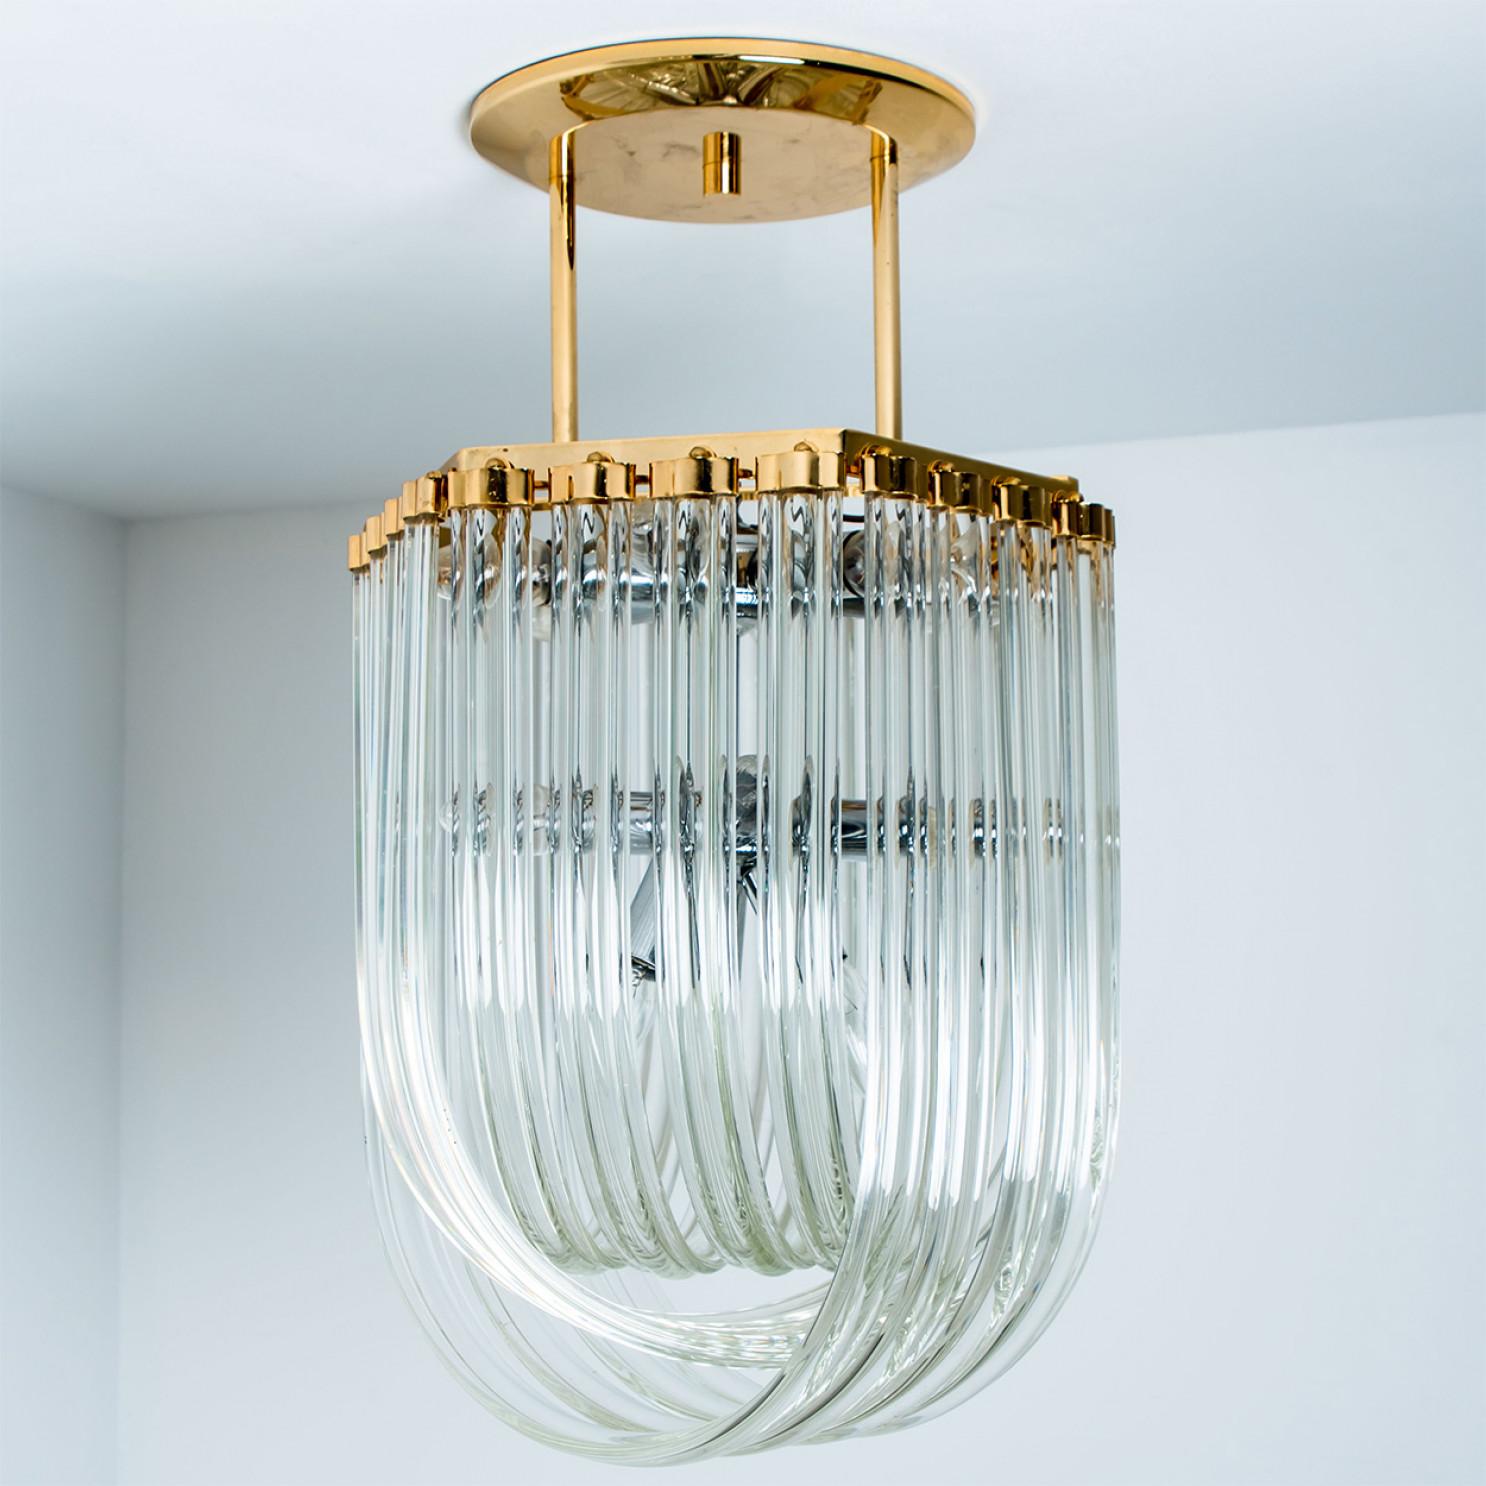 Beautiful chandelier featuring several sides of multiple long curved crystal clear glass 